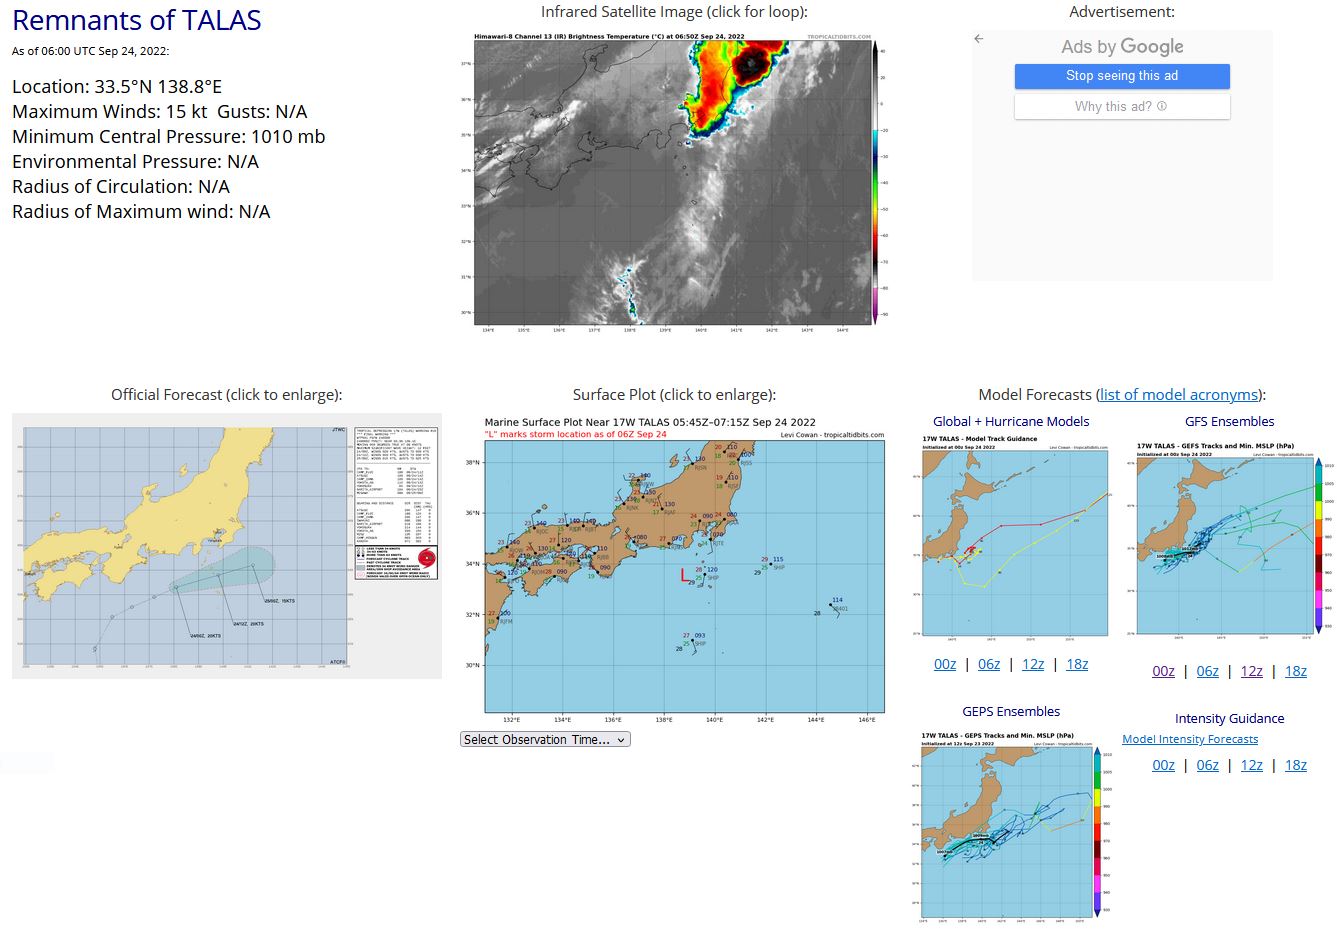 REMARKS: 240300Z POSITION NEAR 33.4N 138.5E. 24SEP22. TROPICAL DEPRESSION (TD) 17W (TALAS), LOCATED APPROXIMATELY 144 NM SOUTHWEST OF YOKOSUKA, JAPAN, HAS TRACKED EAST-NORTHEASTWARD  AT 09 KNOTS OVER THE PAST SIX HOURS. ANIMATED MULTISPECTRAL SATELLITE  IMAGERY INDICATES THAT TD 17W WAS ABSORBED INTO THE WEAK FRONTAL  BOUNDARY EXTENDING SOUTH OF HONSHU AND HAS COMPLETELY DISSIPATED;  THERE IS NO EVIDENCE OF A DISTINCT LOW-LEVEL CIRCULATION. A 232152Z  SCATTEROMETER IMAGE SHOWS A TROUGH EXTENDING SOUTH FROM THE IZU  PENINSULA WITH NO CLOSED CIRCULATION. ANIMATED RADAR IMAGERY SHOWS  SEVERAL PROMINENT RAINBANDS FLOWING NORTHWARD INTO THE FRONTAL  BOUNDARY. NUMERICAL MODEL GUIDANCE SHOWS ANOTHER EXTRA-TROPICAL LOW  (NOT TD 17W) WILL FORM ALONG THE FRONTAL BOUNDARY OVER THE IZU  PENINSULA AND TRACK EASTWARD WITH LITTLE DEVELOPMENT OVER THE NEXT  TWO DAYS. THIS IS THE FINAL WARNING ON THIS SYSTEM BY THE JOINT  TYPHOON WRNCEN PEARL HARBOR HI. THE SYSTEM WILL BE CLOSELY MONITORED  FOR SIGNS OF REGENERATION. MAXIMUM SIGNIFICANT WAVE HEIGHT AT 240000Z  IS 12 FEET.